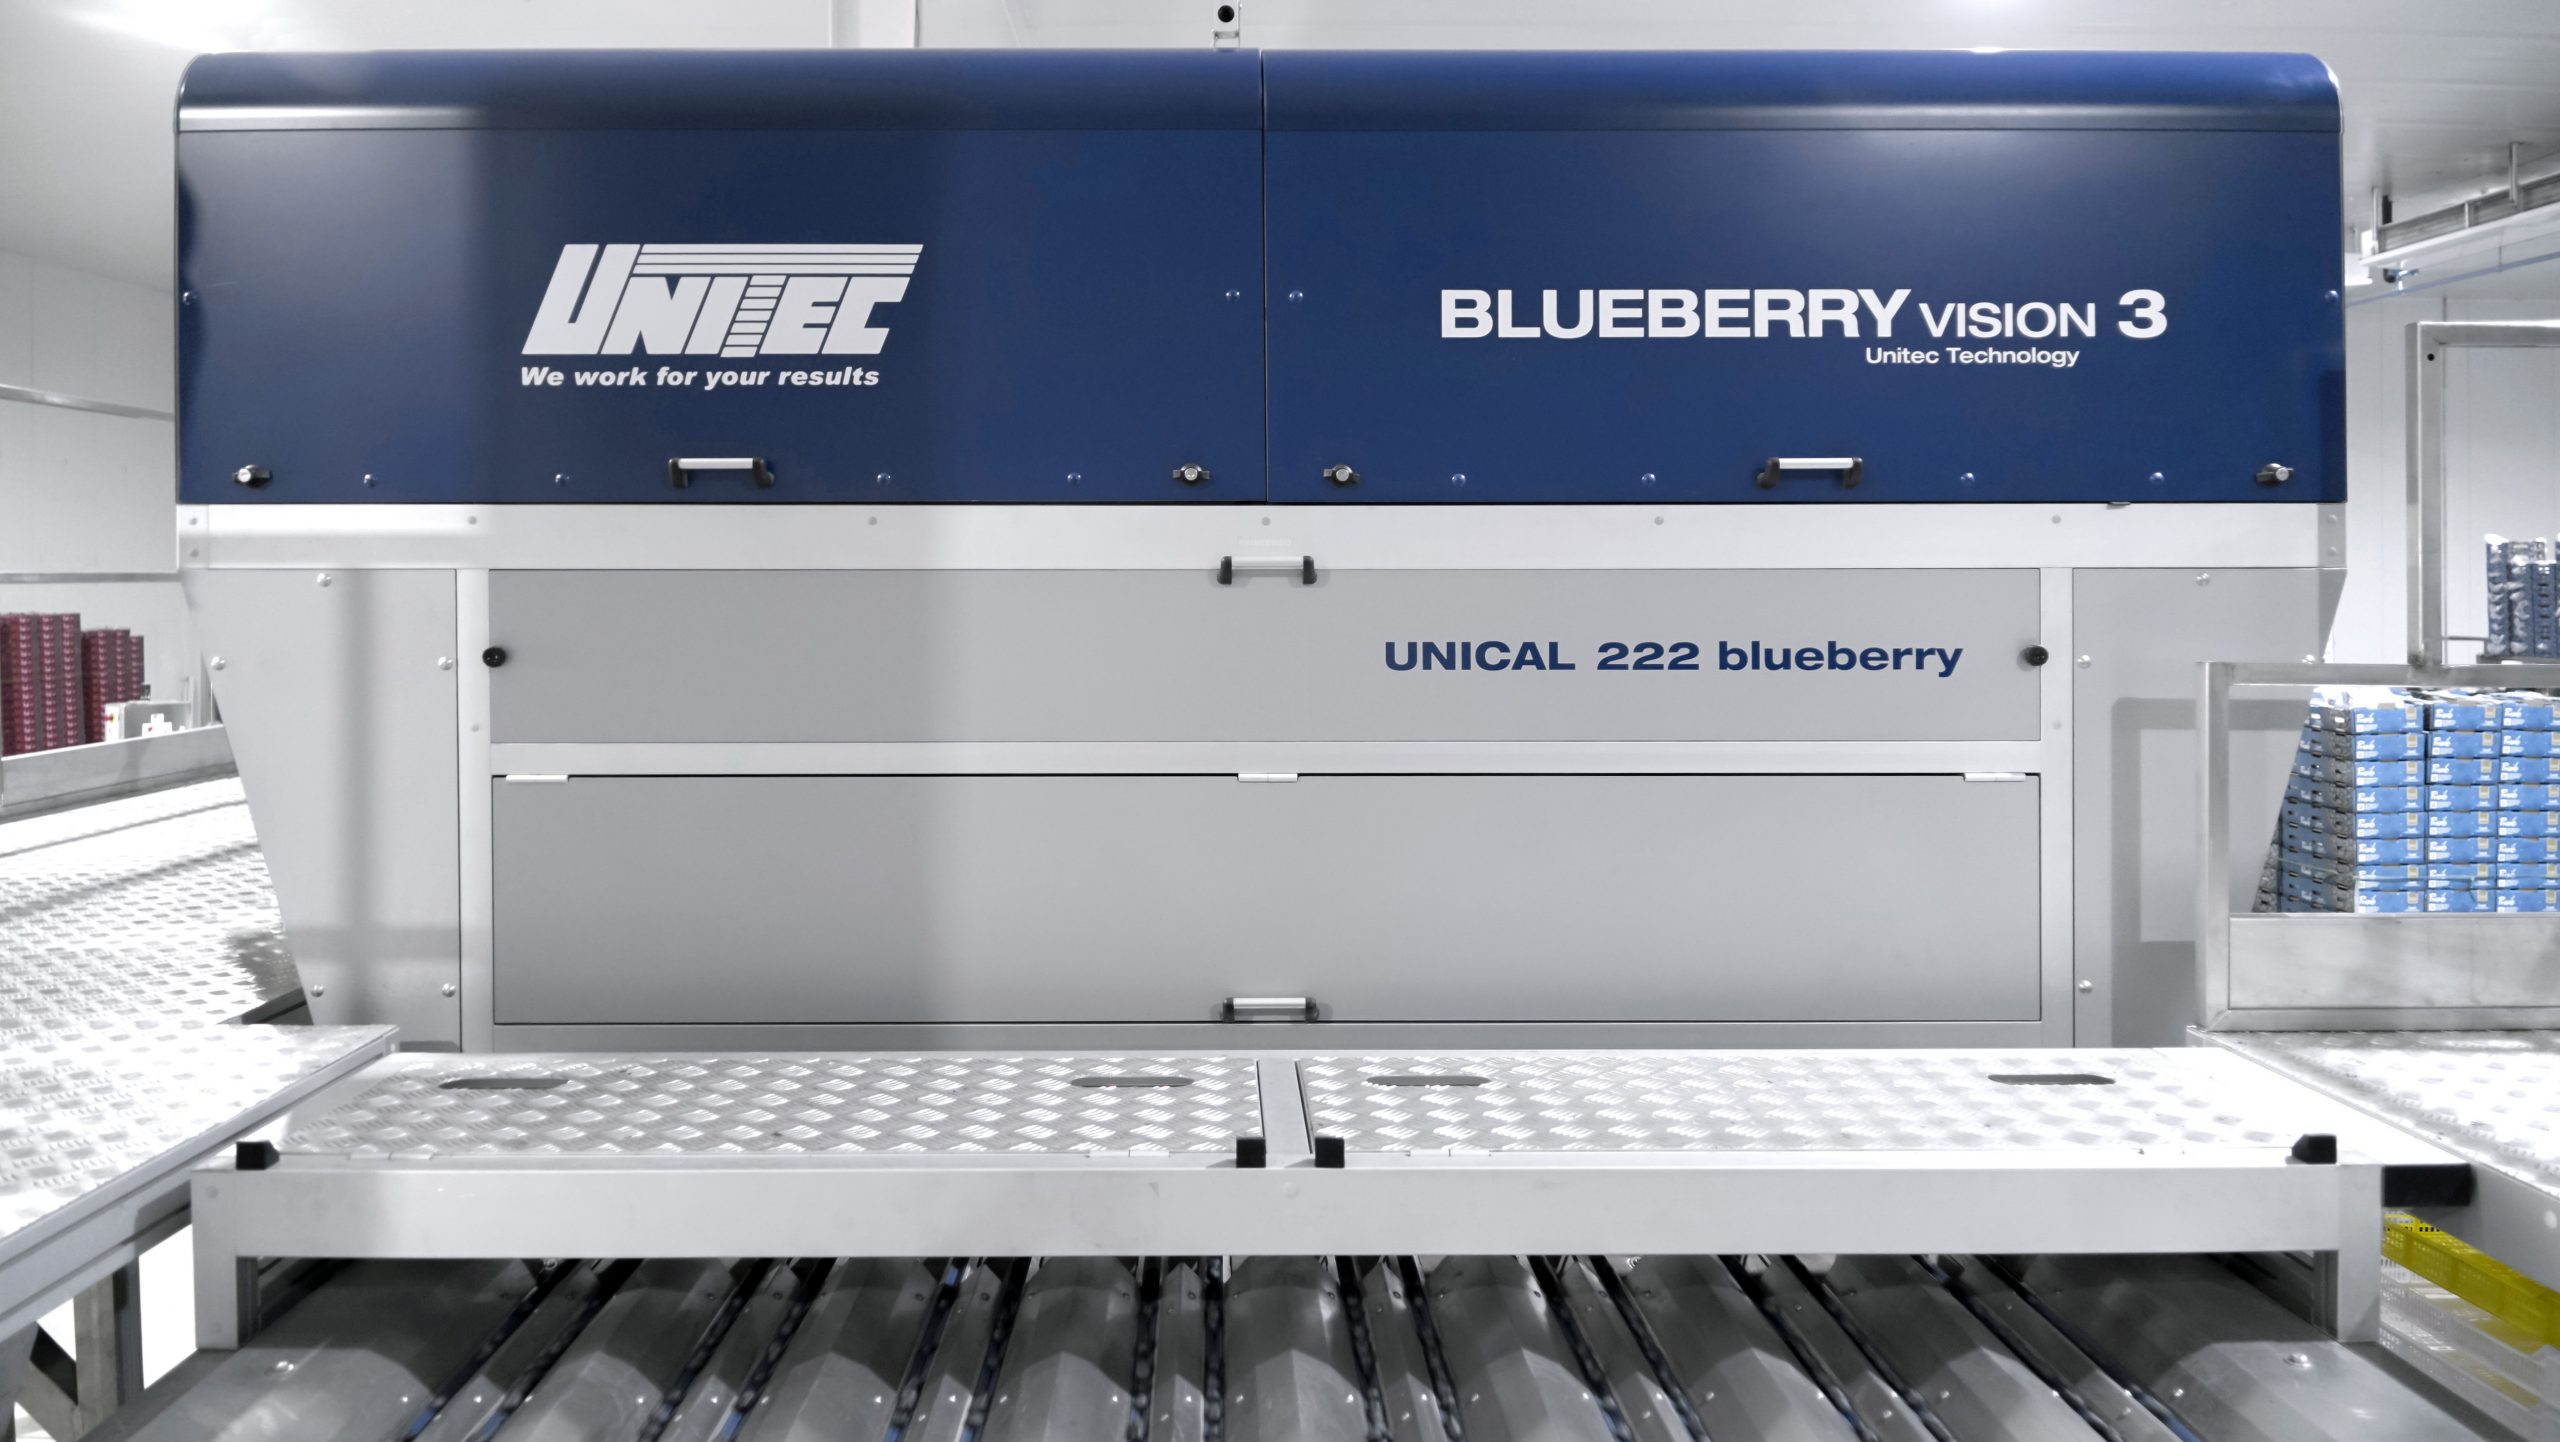 UNITEC blueberry vision 3: Competitive advantage for blueberry quality selection